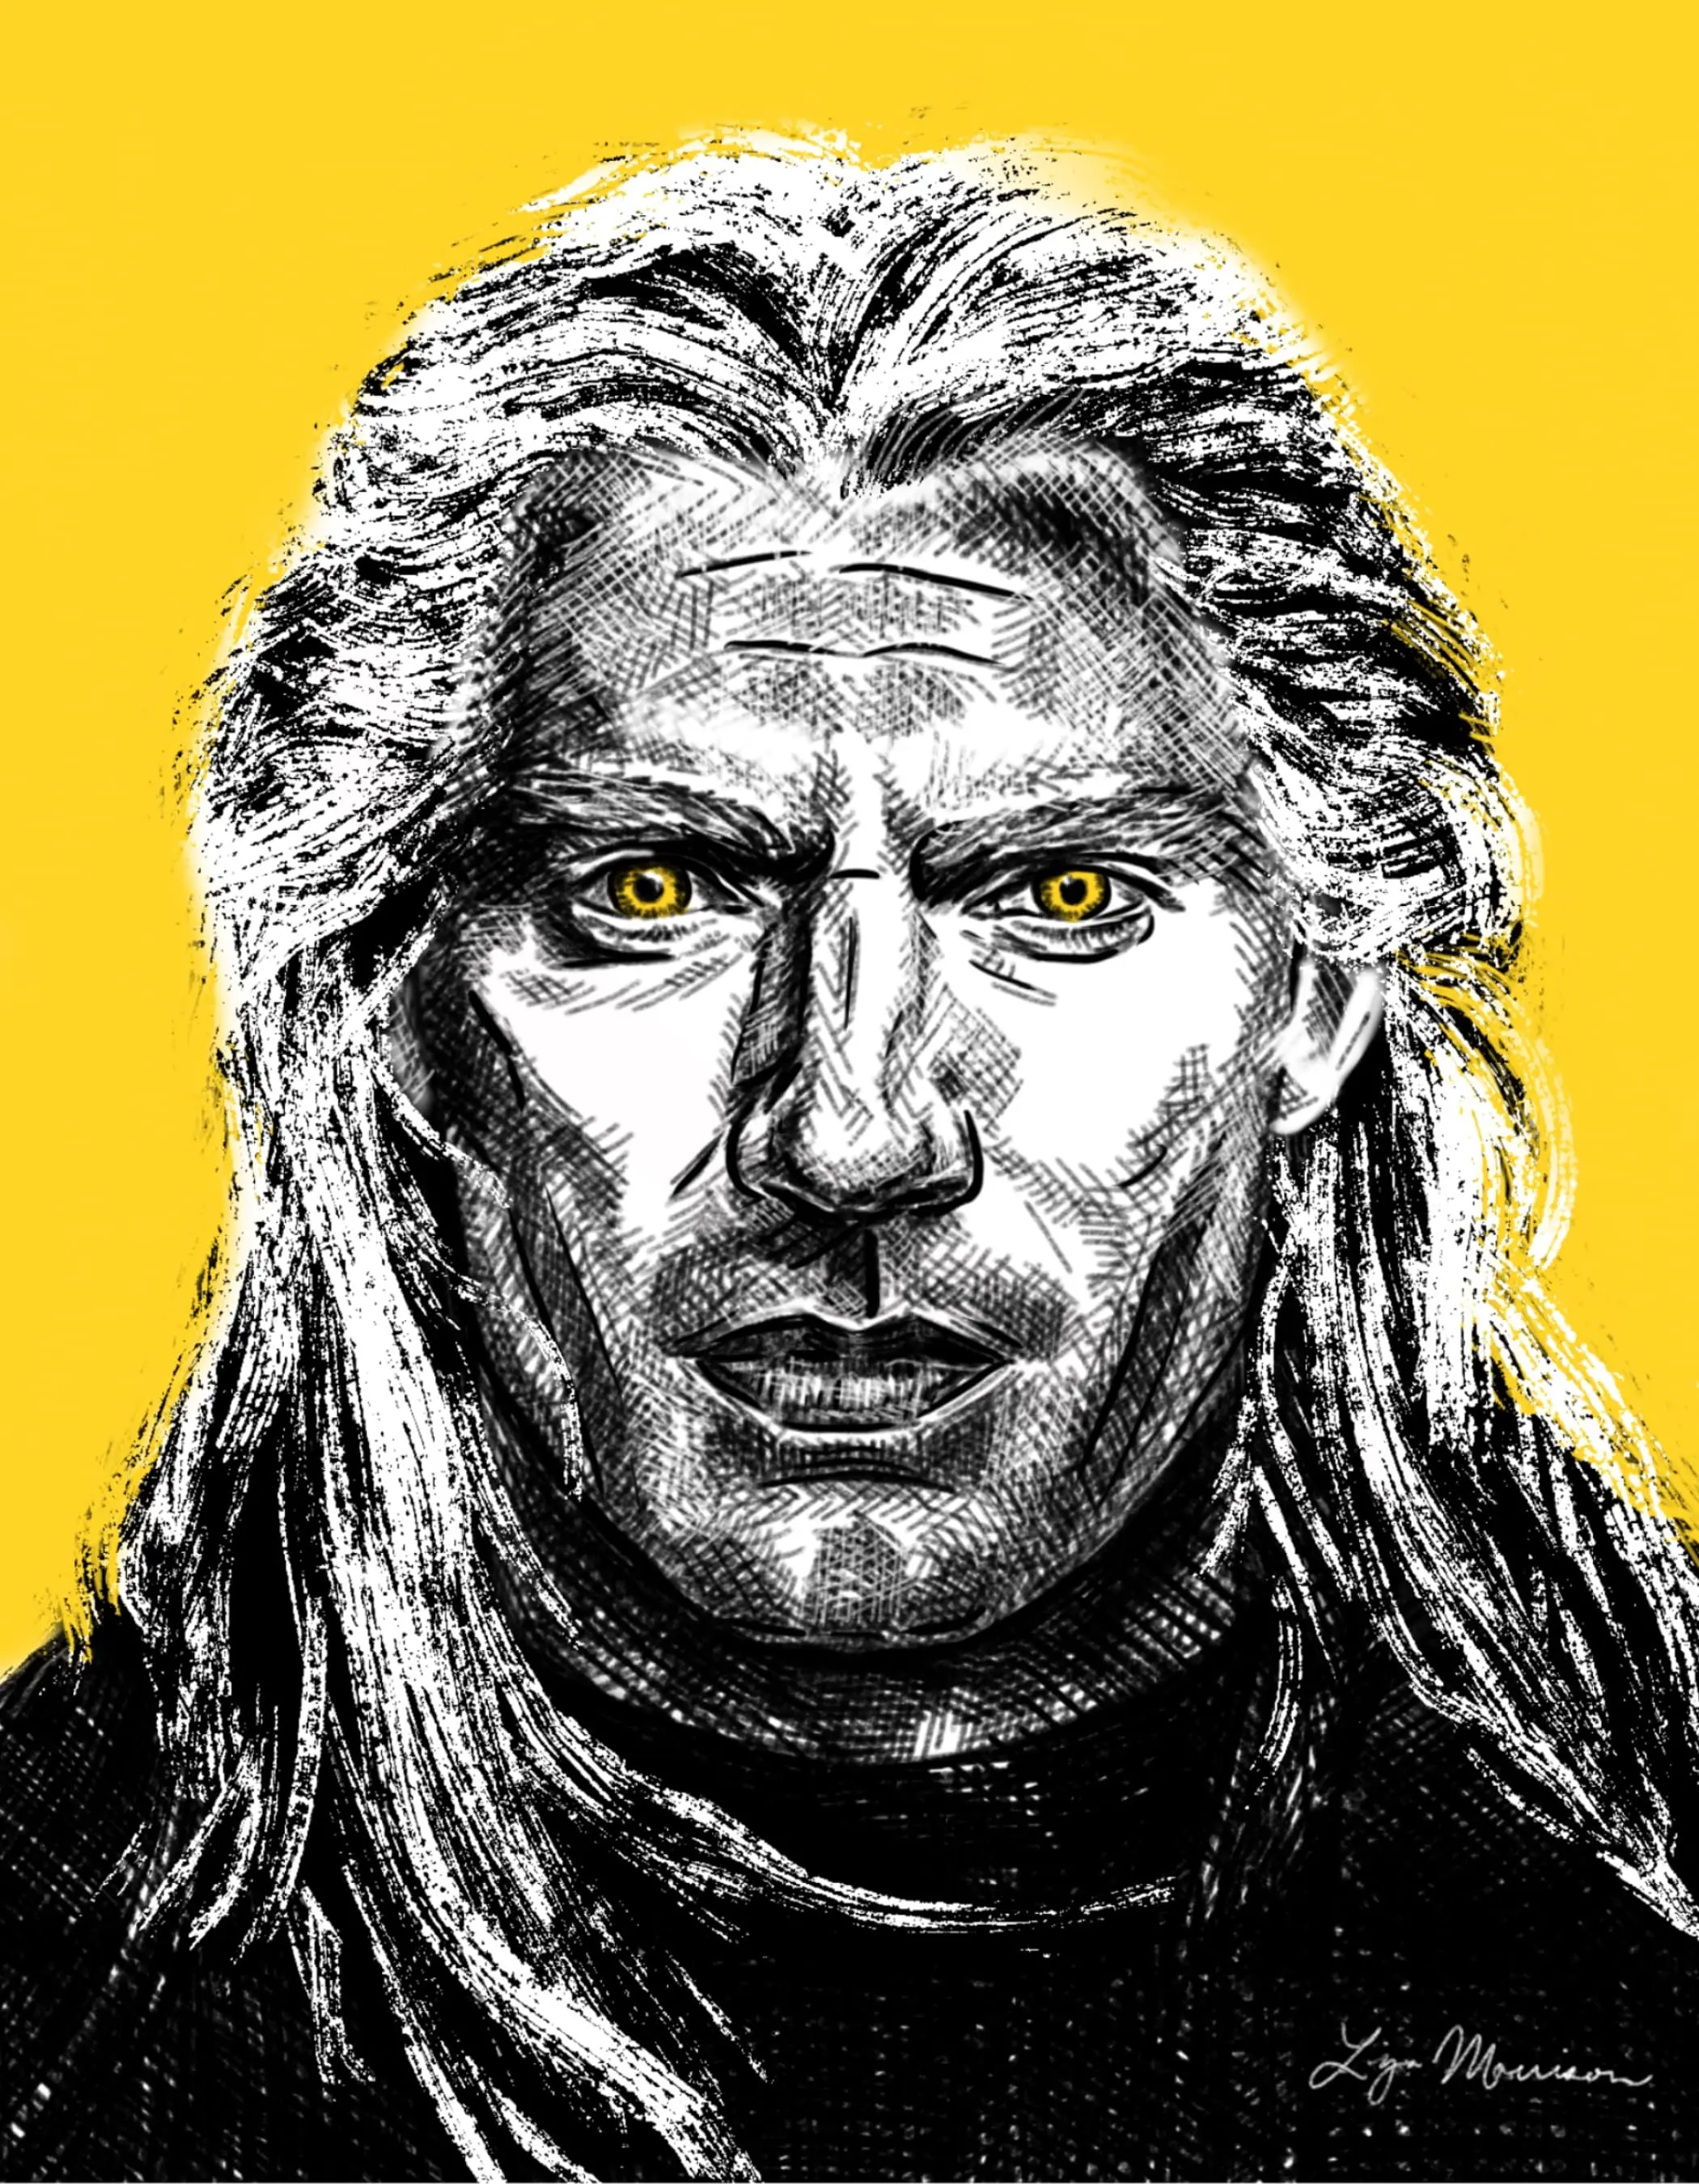 Digital drawing of the witcher